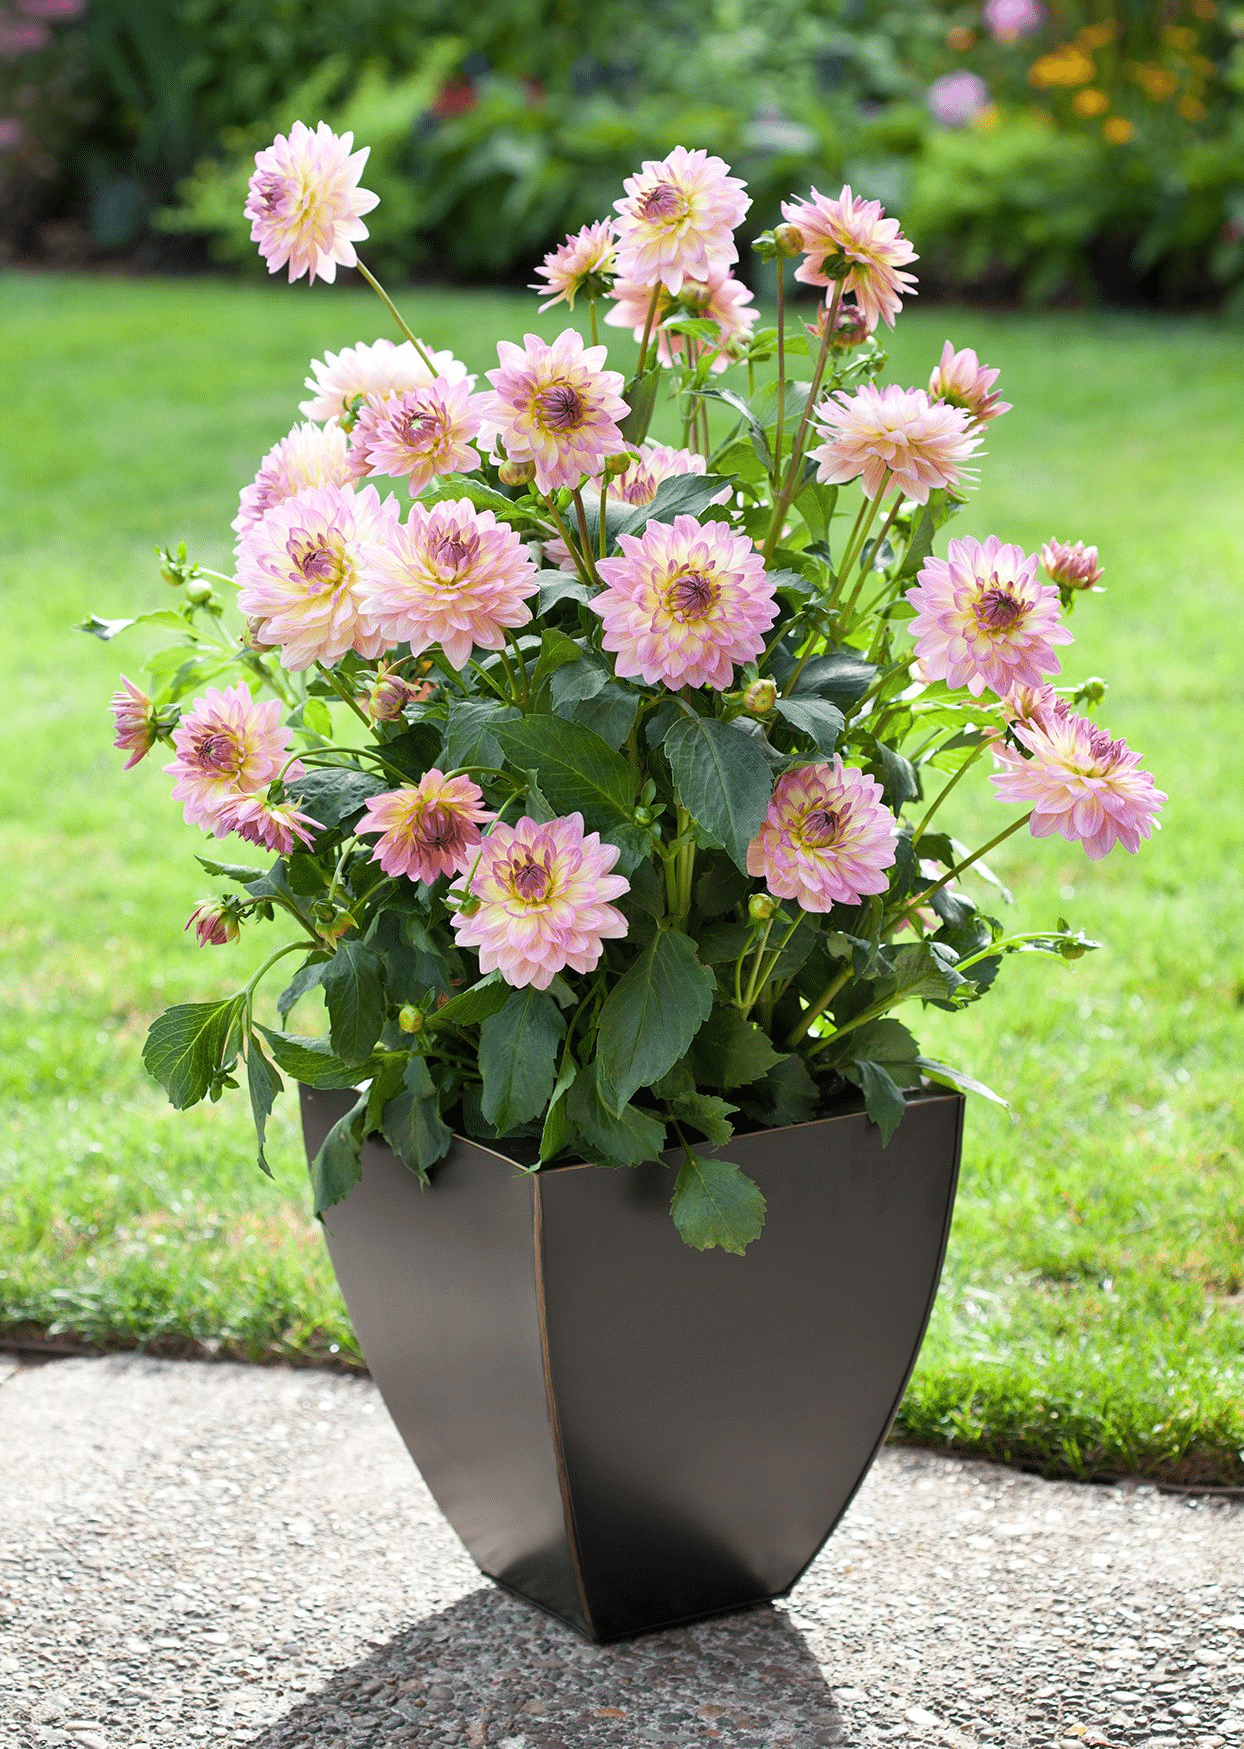 A dahlia plant with flowers and foliage in a pot